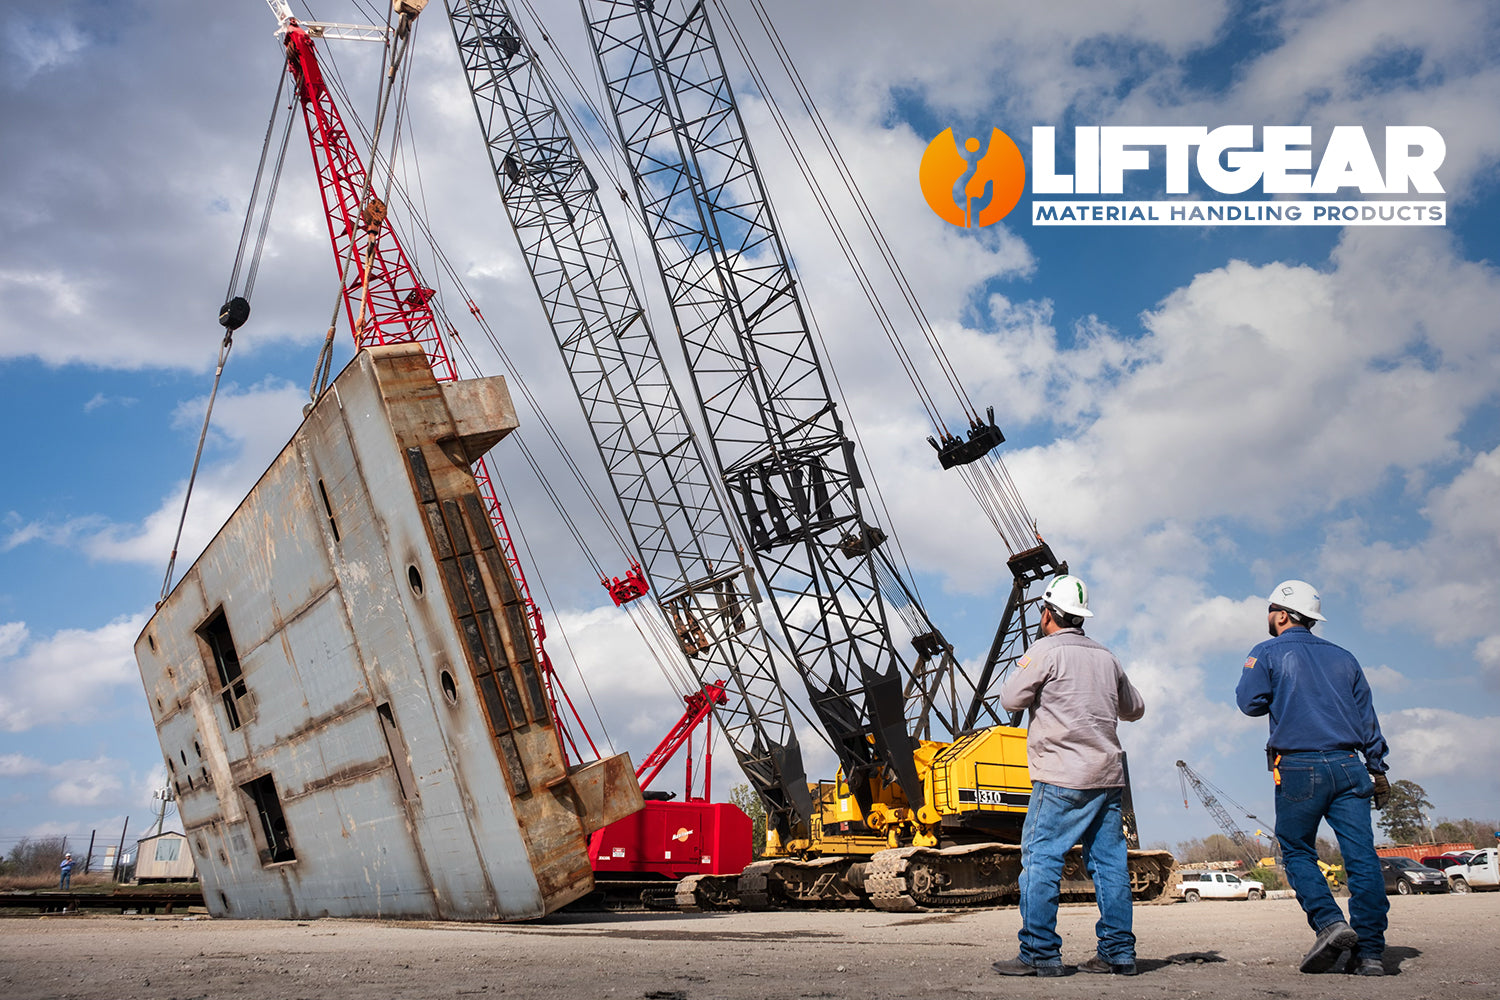 Does every project use LIFTGEAR?